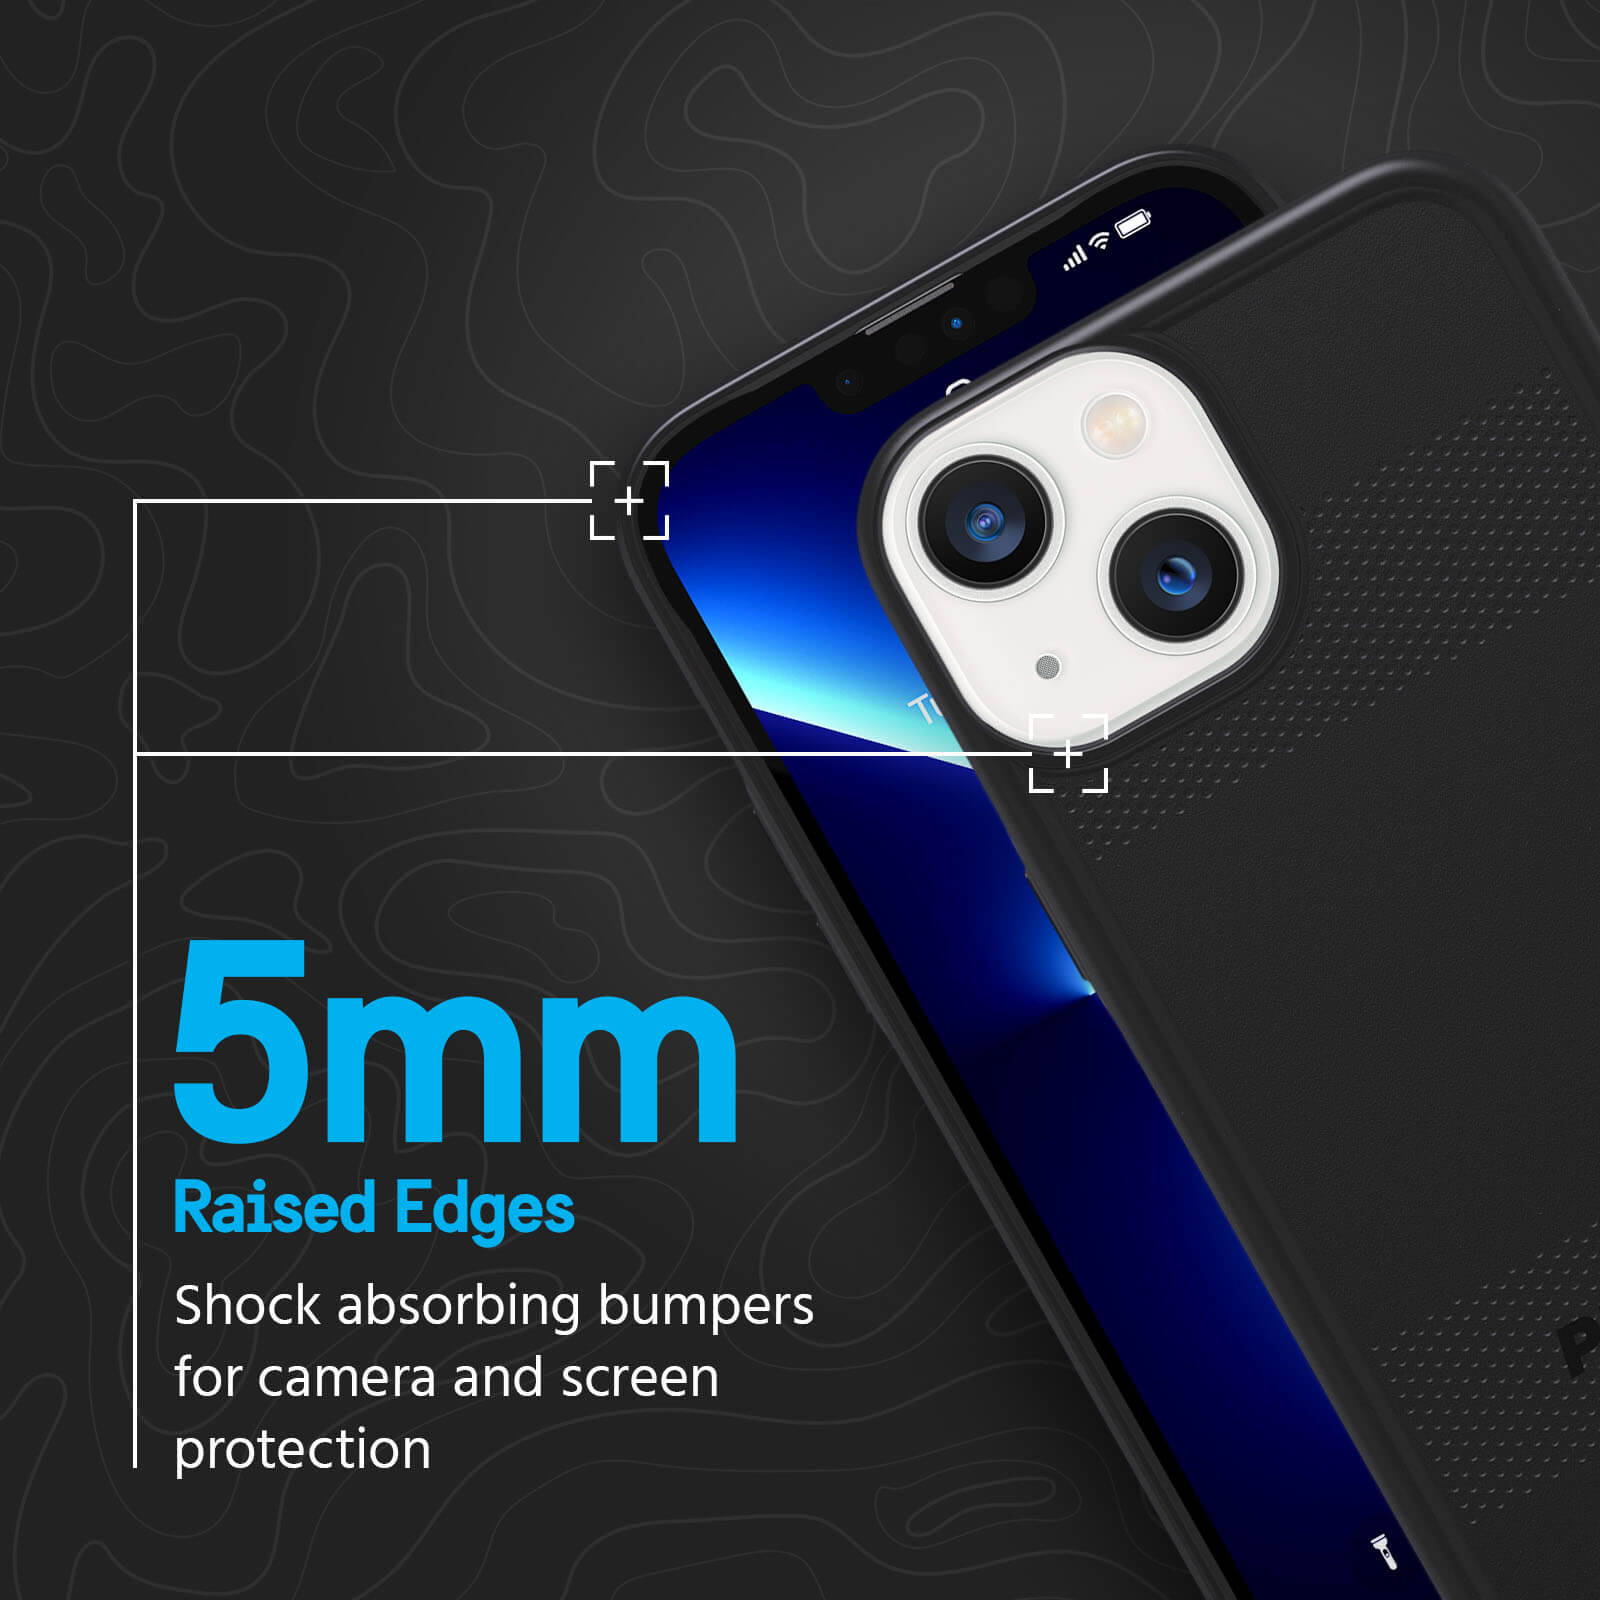 5mm Raised Edges shock absorbing bumpers for camera and screen protection. color::Black